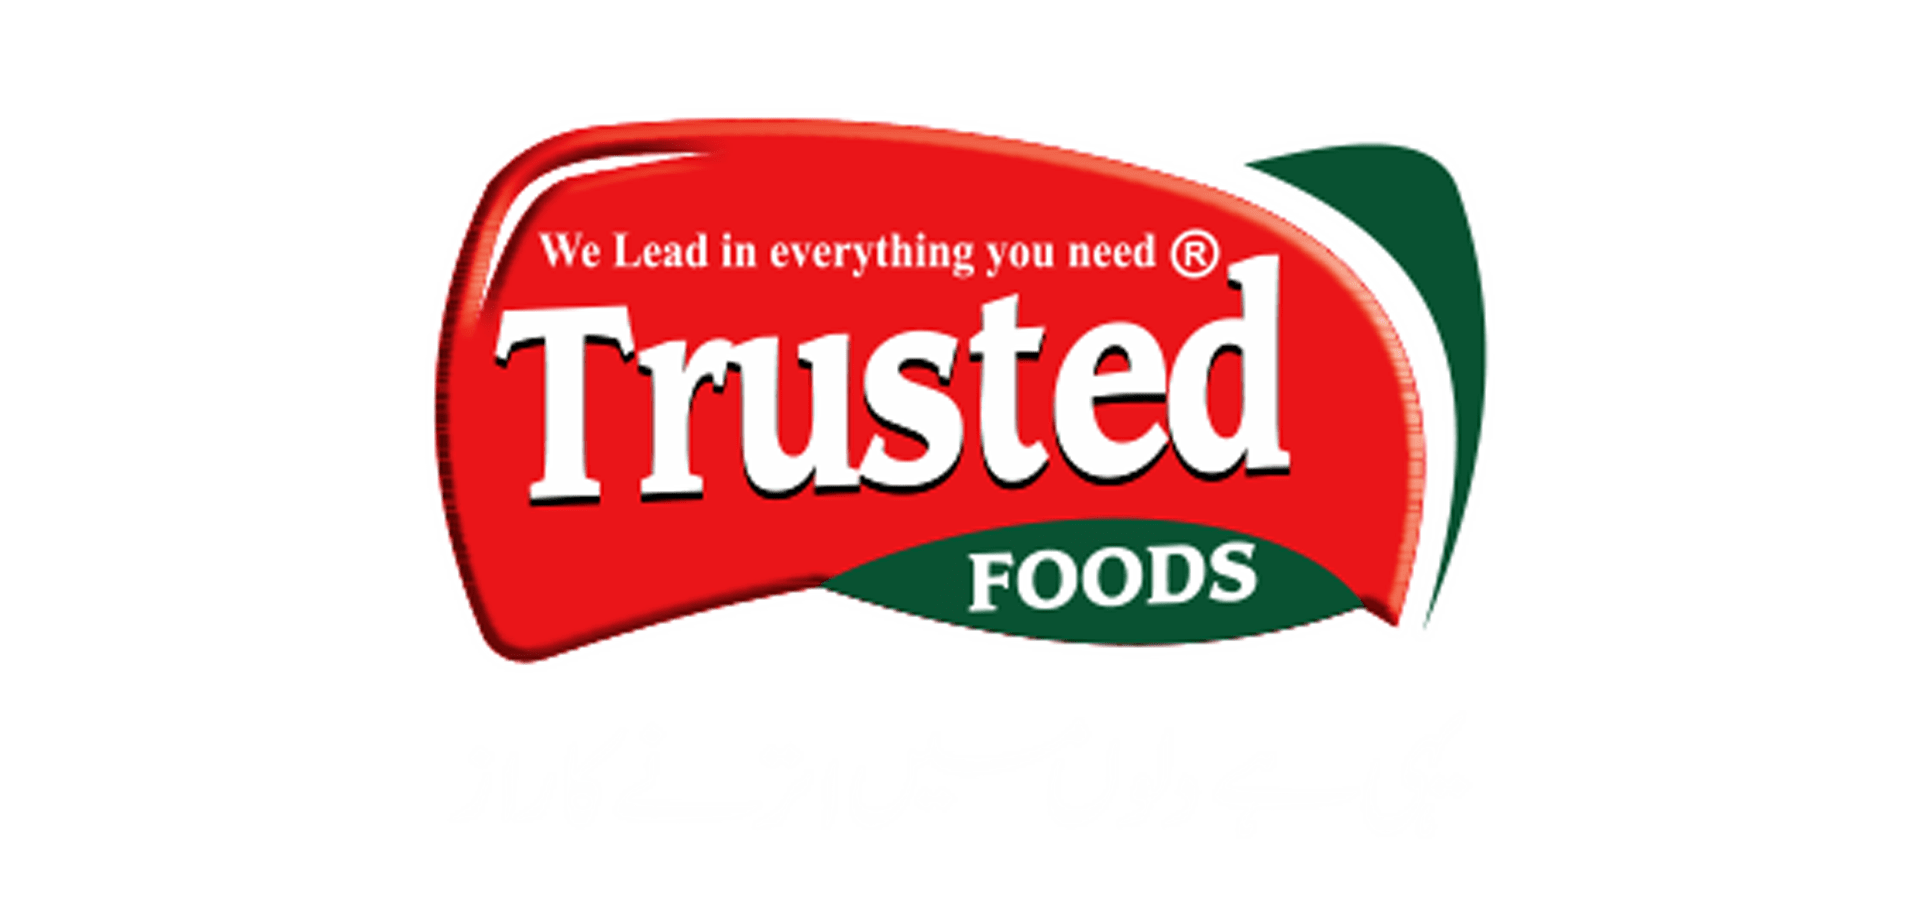 Trusted Food